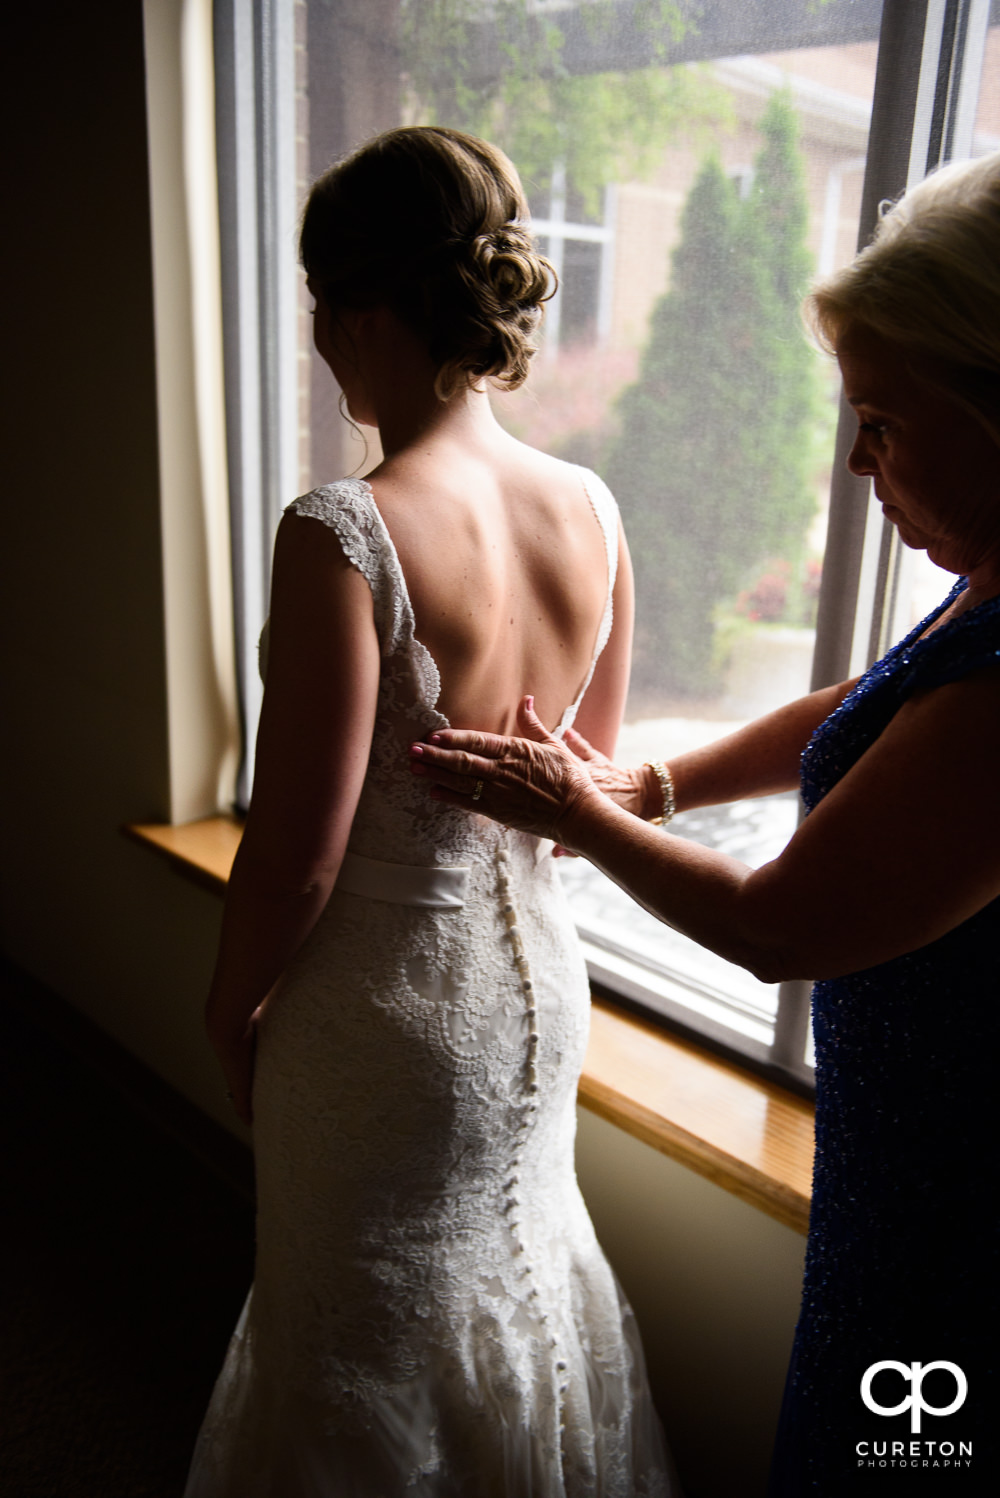 Bride's mother helping her into the dress.